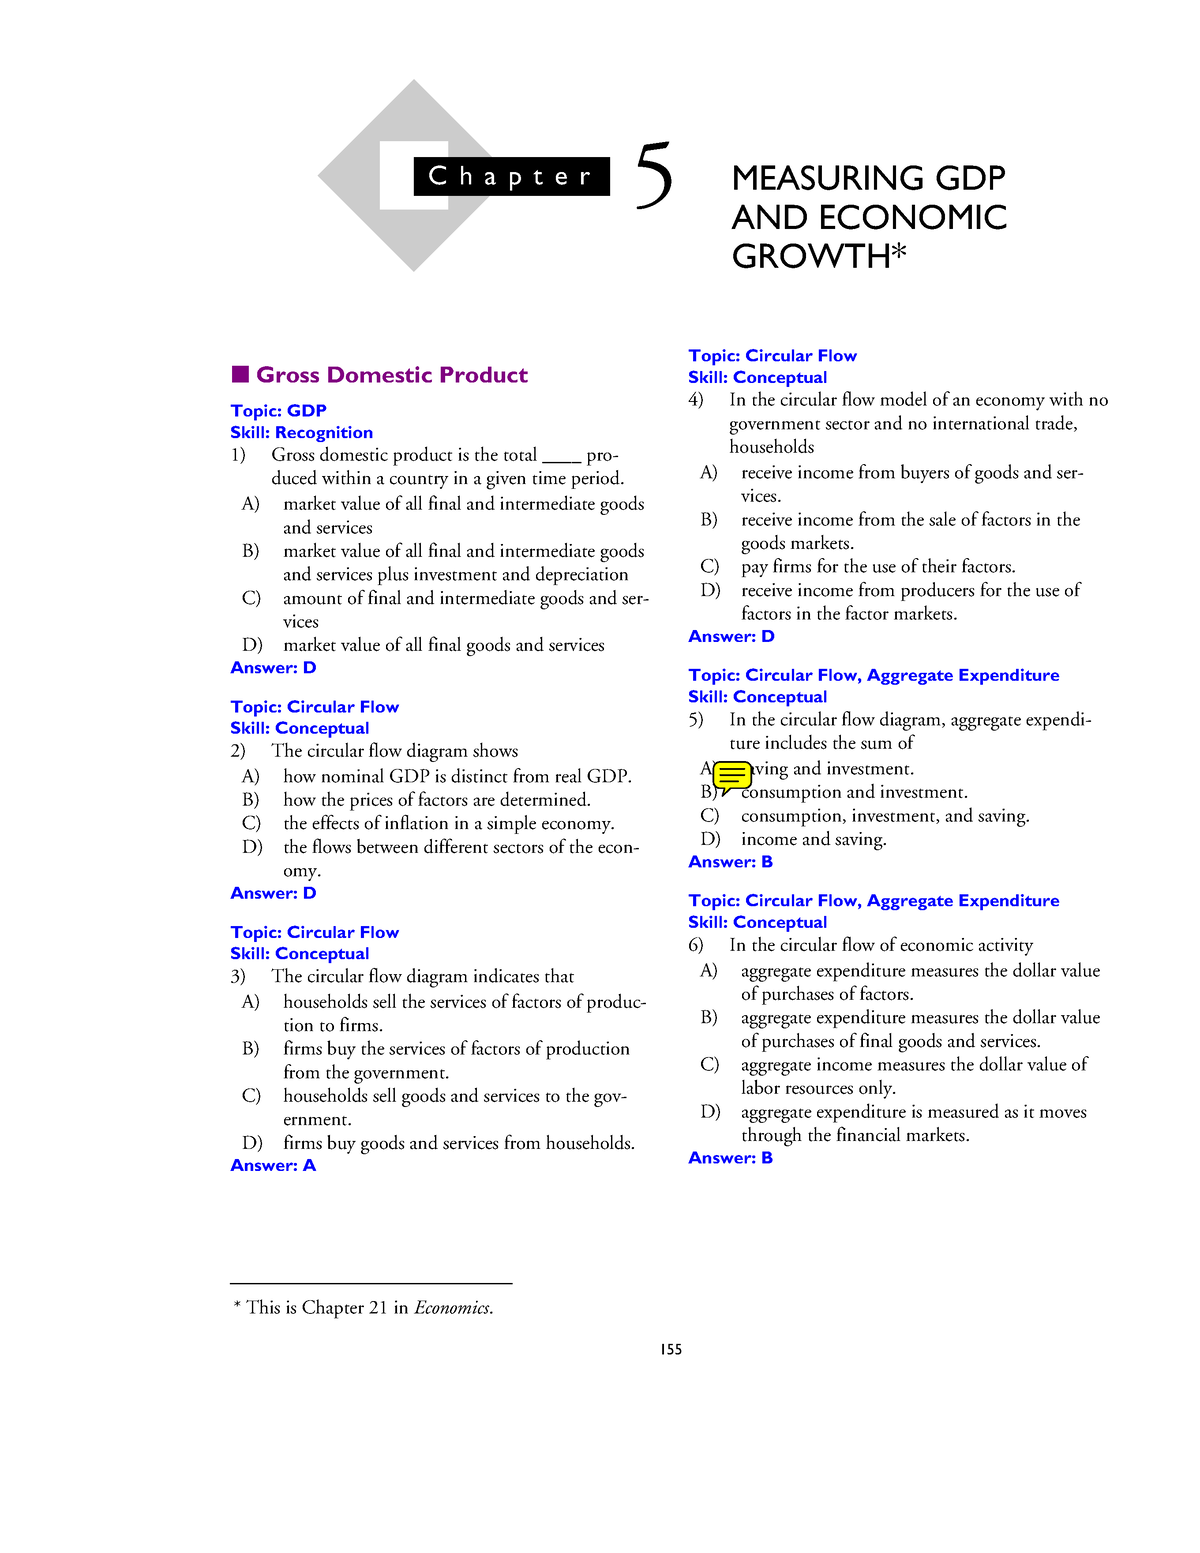 GDP practice questions 155 5 MEASURING GDP AND ECONOMIC GROWTH* This